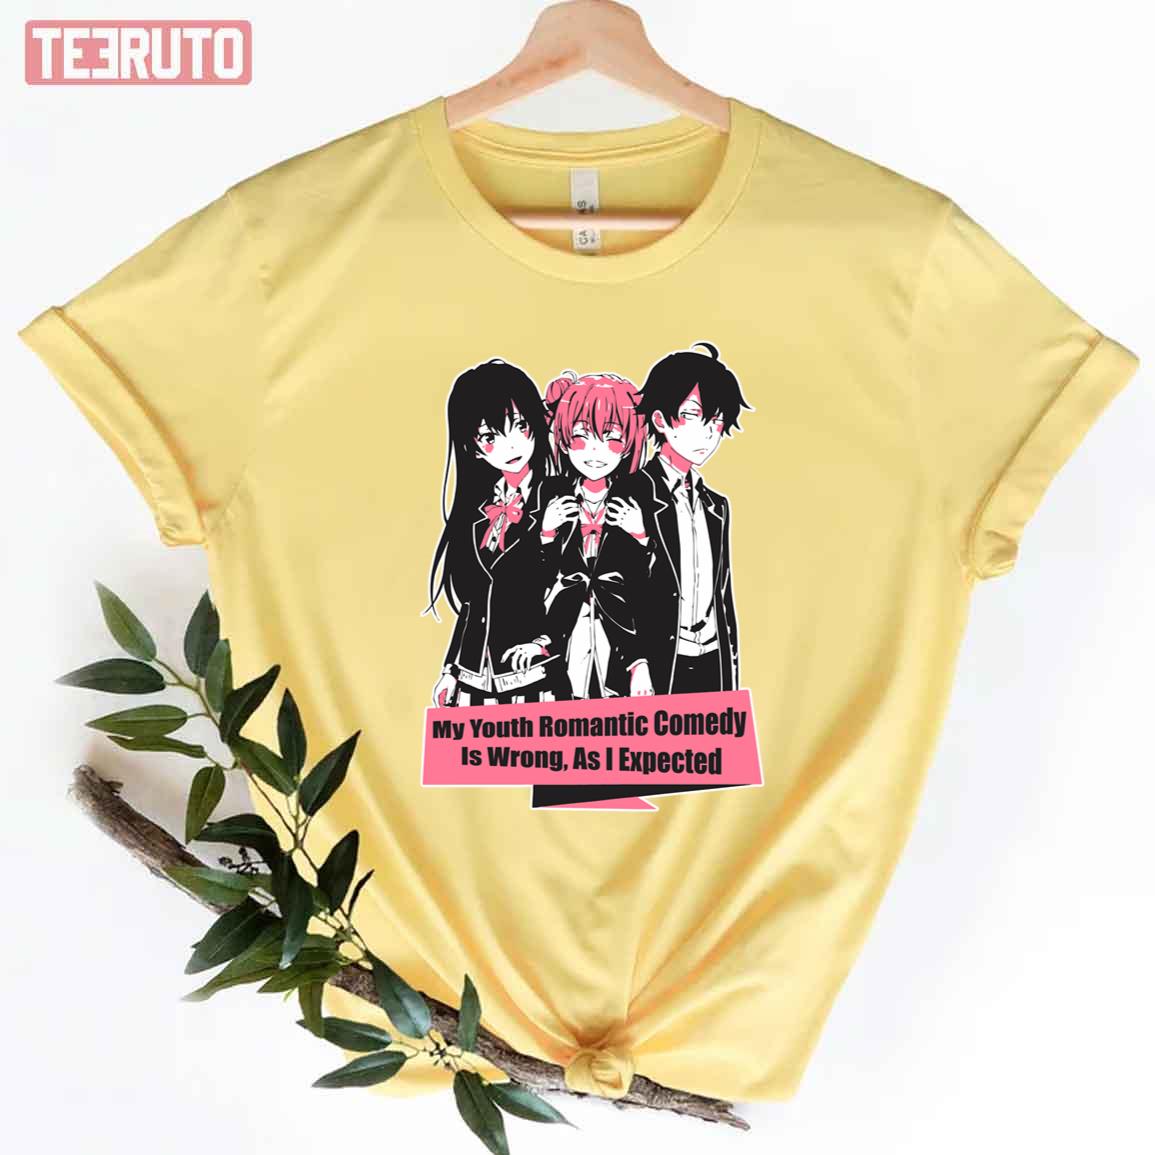 Oregairu My Youth Romantic Comedy Is Wrong As I Expected Unisex T-Shirt